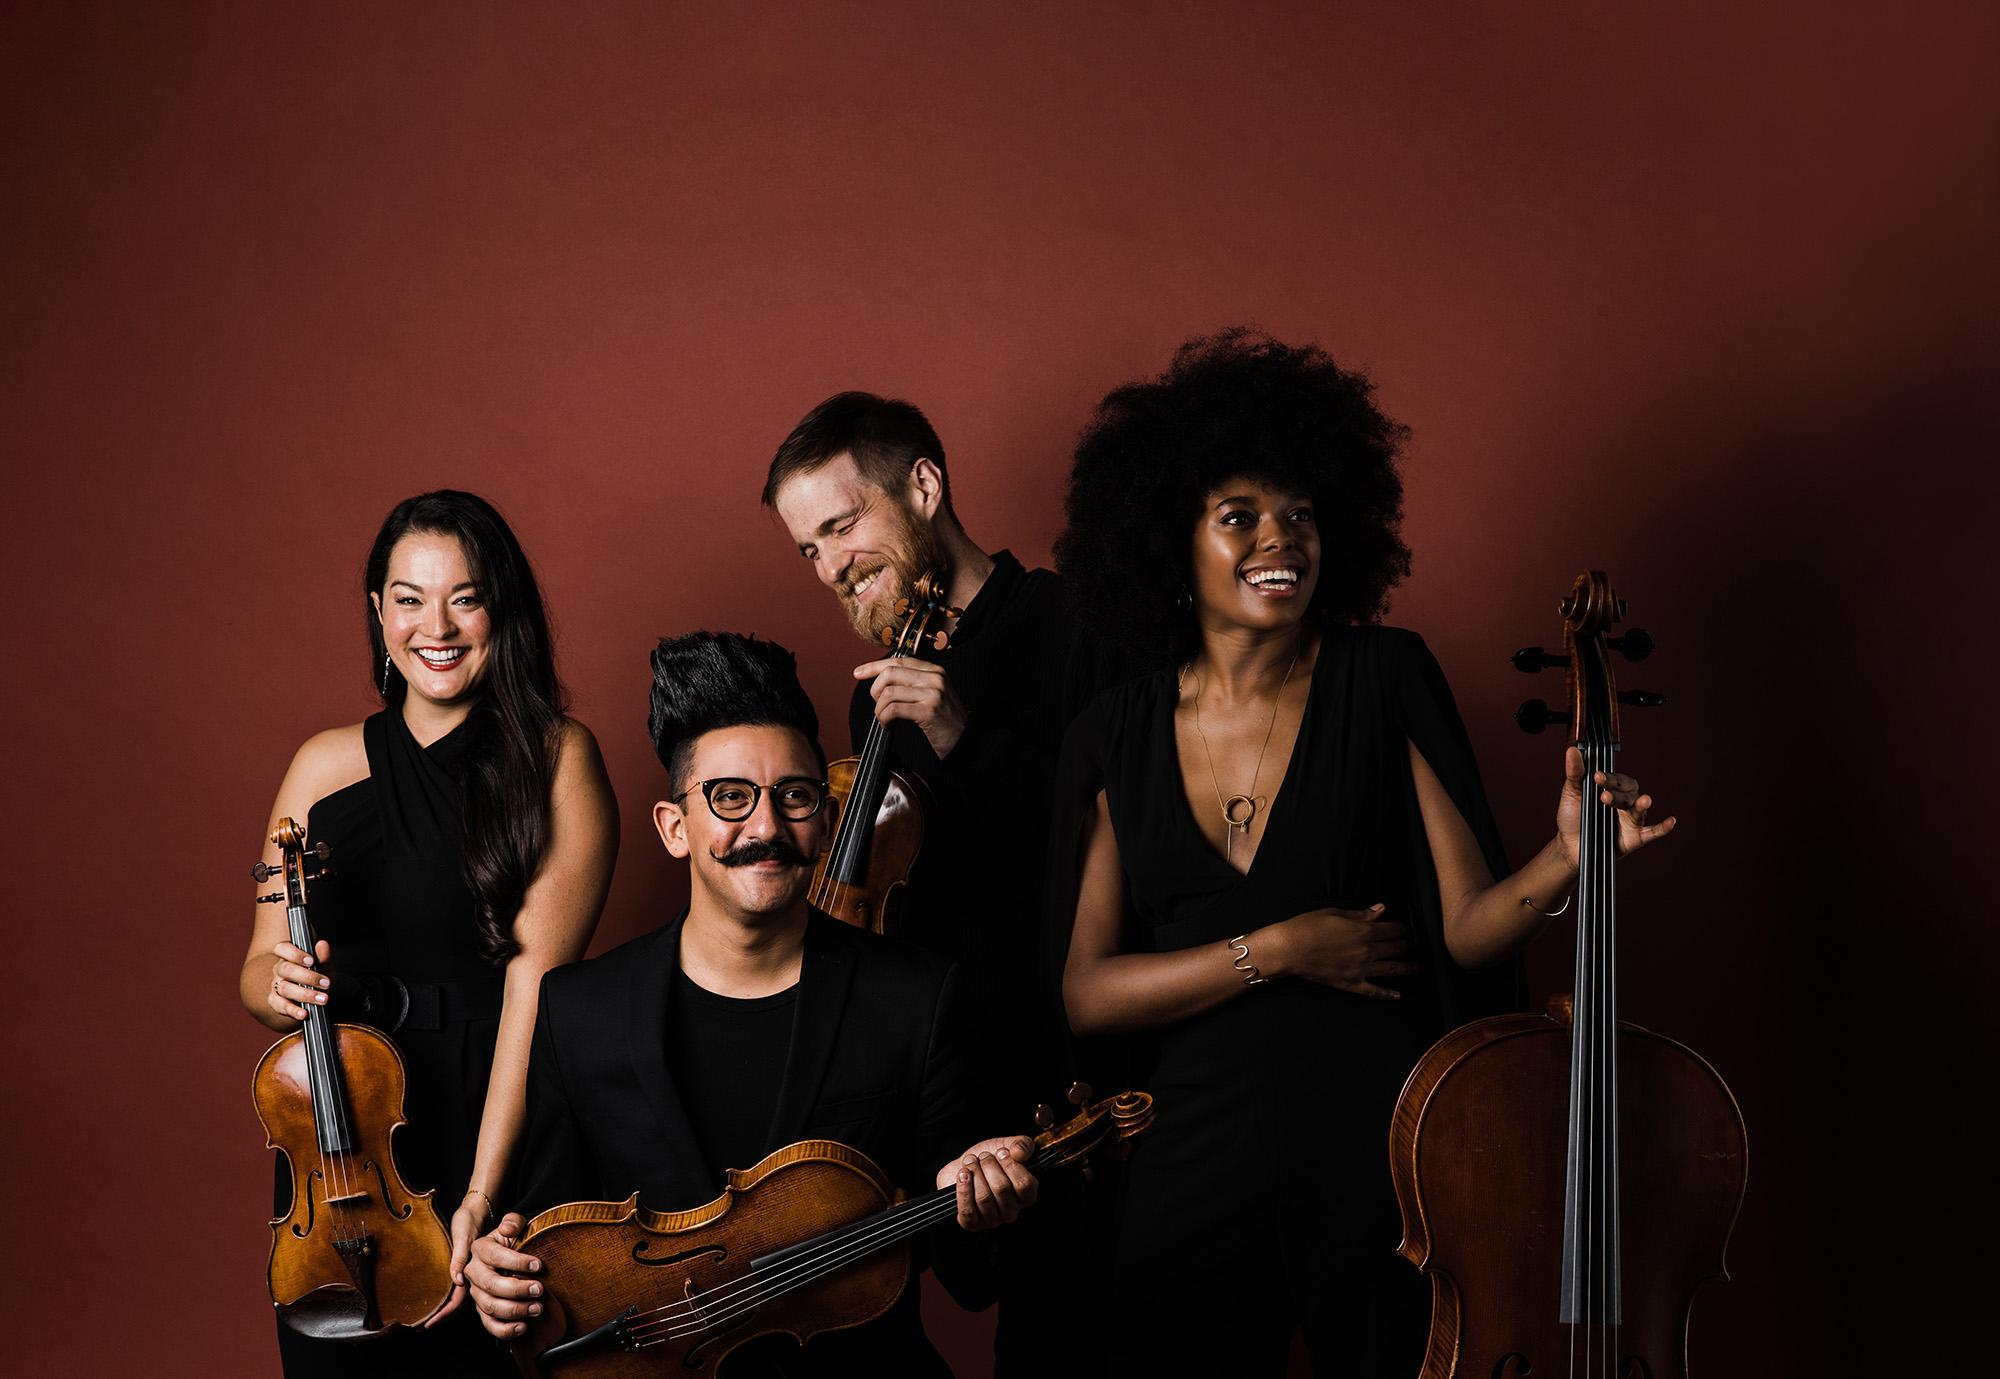 Thalea String Quartet pose with instruments in front of a red wall